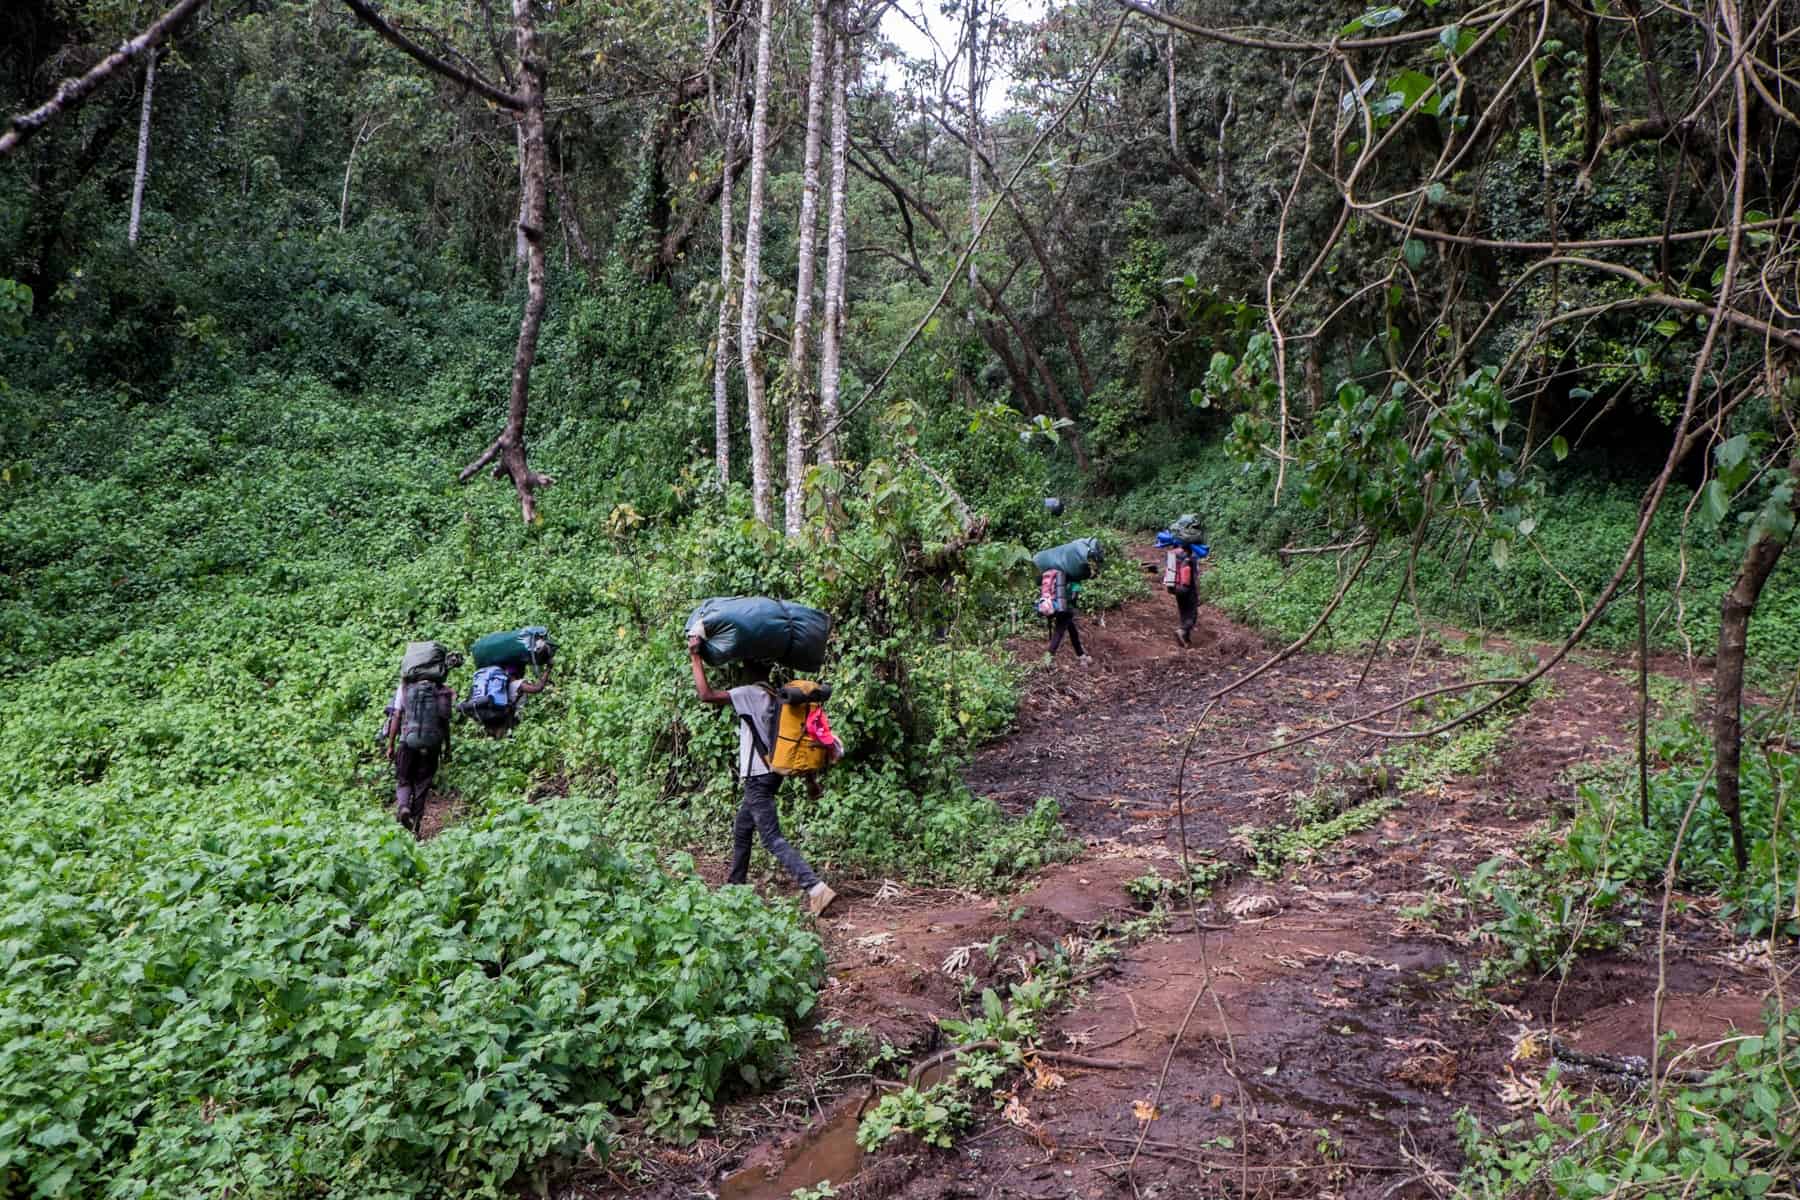 Fiver porters carrying green bags on their heads, walk on a orange mud pathway in the Rainforest Zone of Kilimanjaro